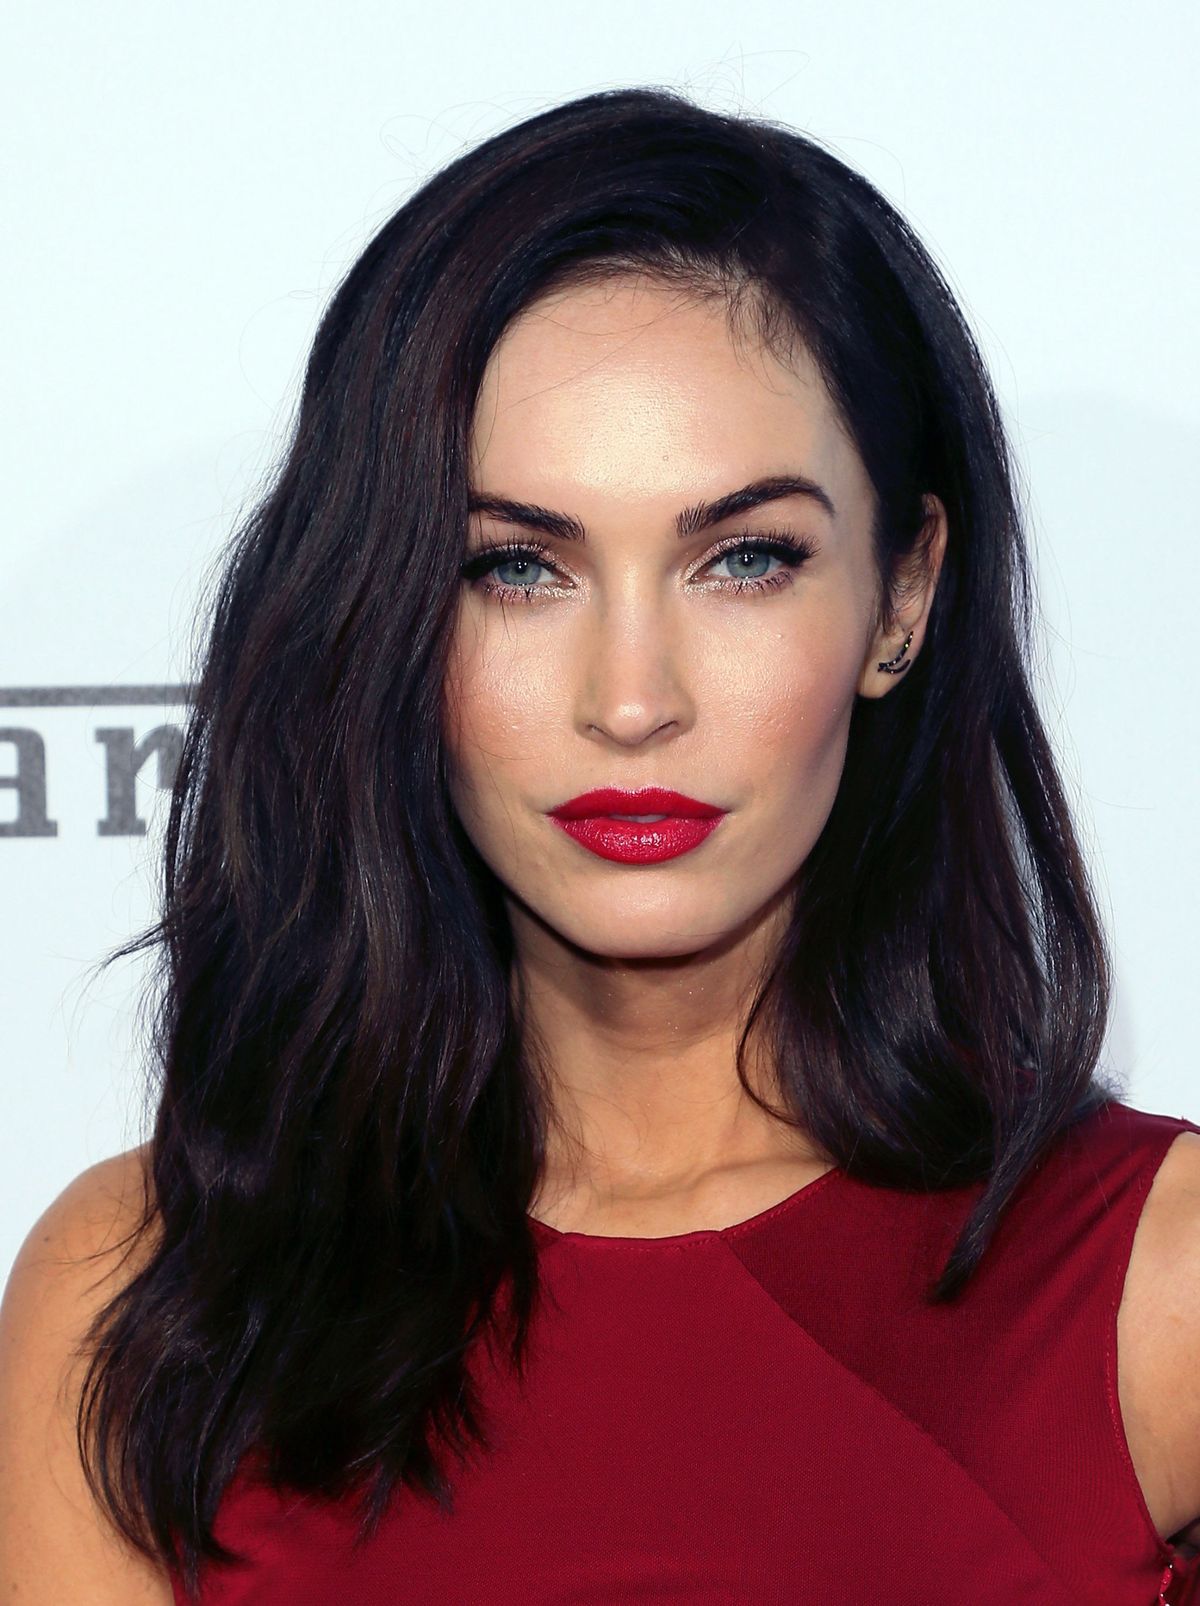 Transformer Fucking Megan Fox - Megan Fox Is an Original DGAF Celebrity and It's Time She Gets Your Respect